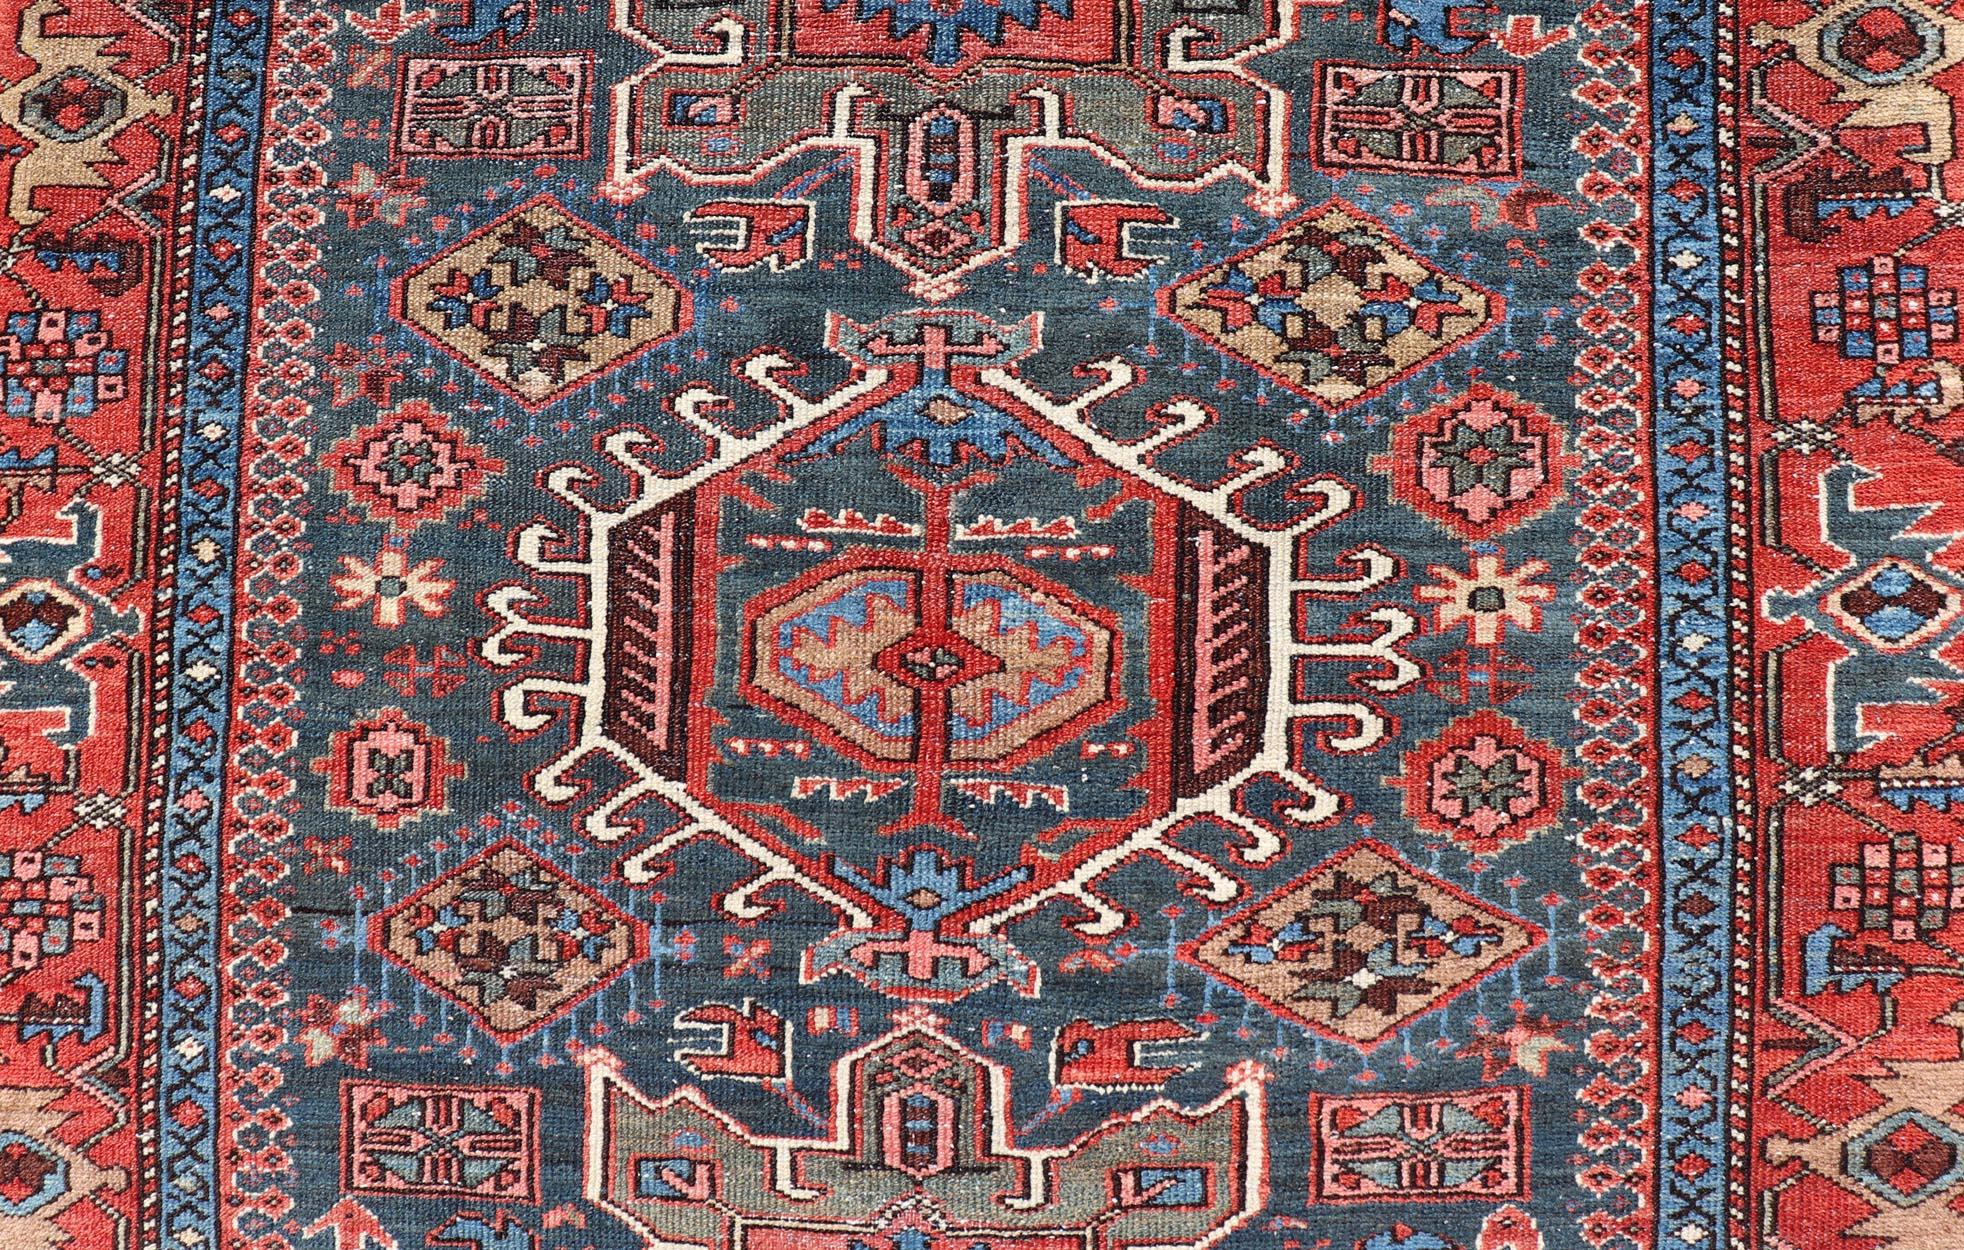 Antique Persian Karajeh Rug with Three Geometric Medallions in Red & Blue. Keivan Woven Arts / rug EMB-22109-15037, country of origin / type: Persian / Serapi-Karajeh, circa early-20th century.
Measures: 4'5 x 6'1 
Traditionally inspired by the